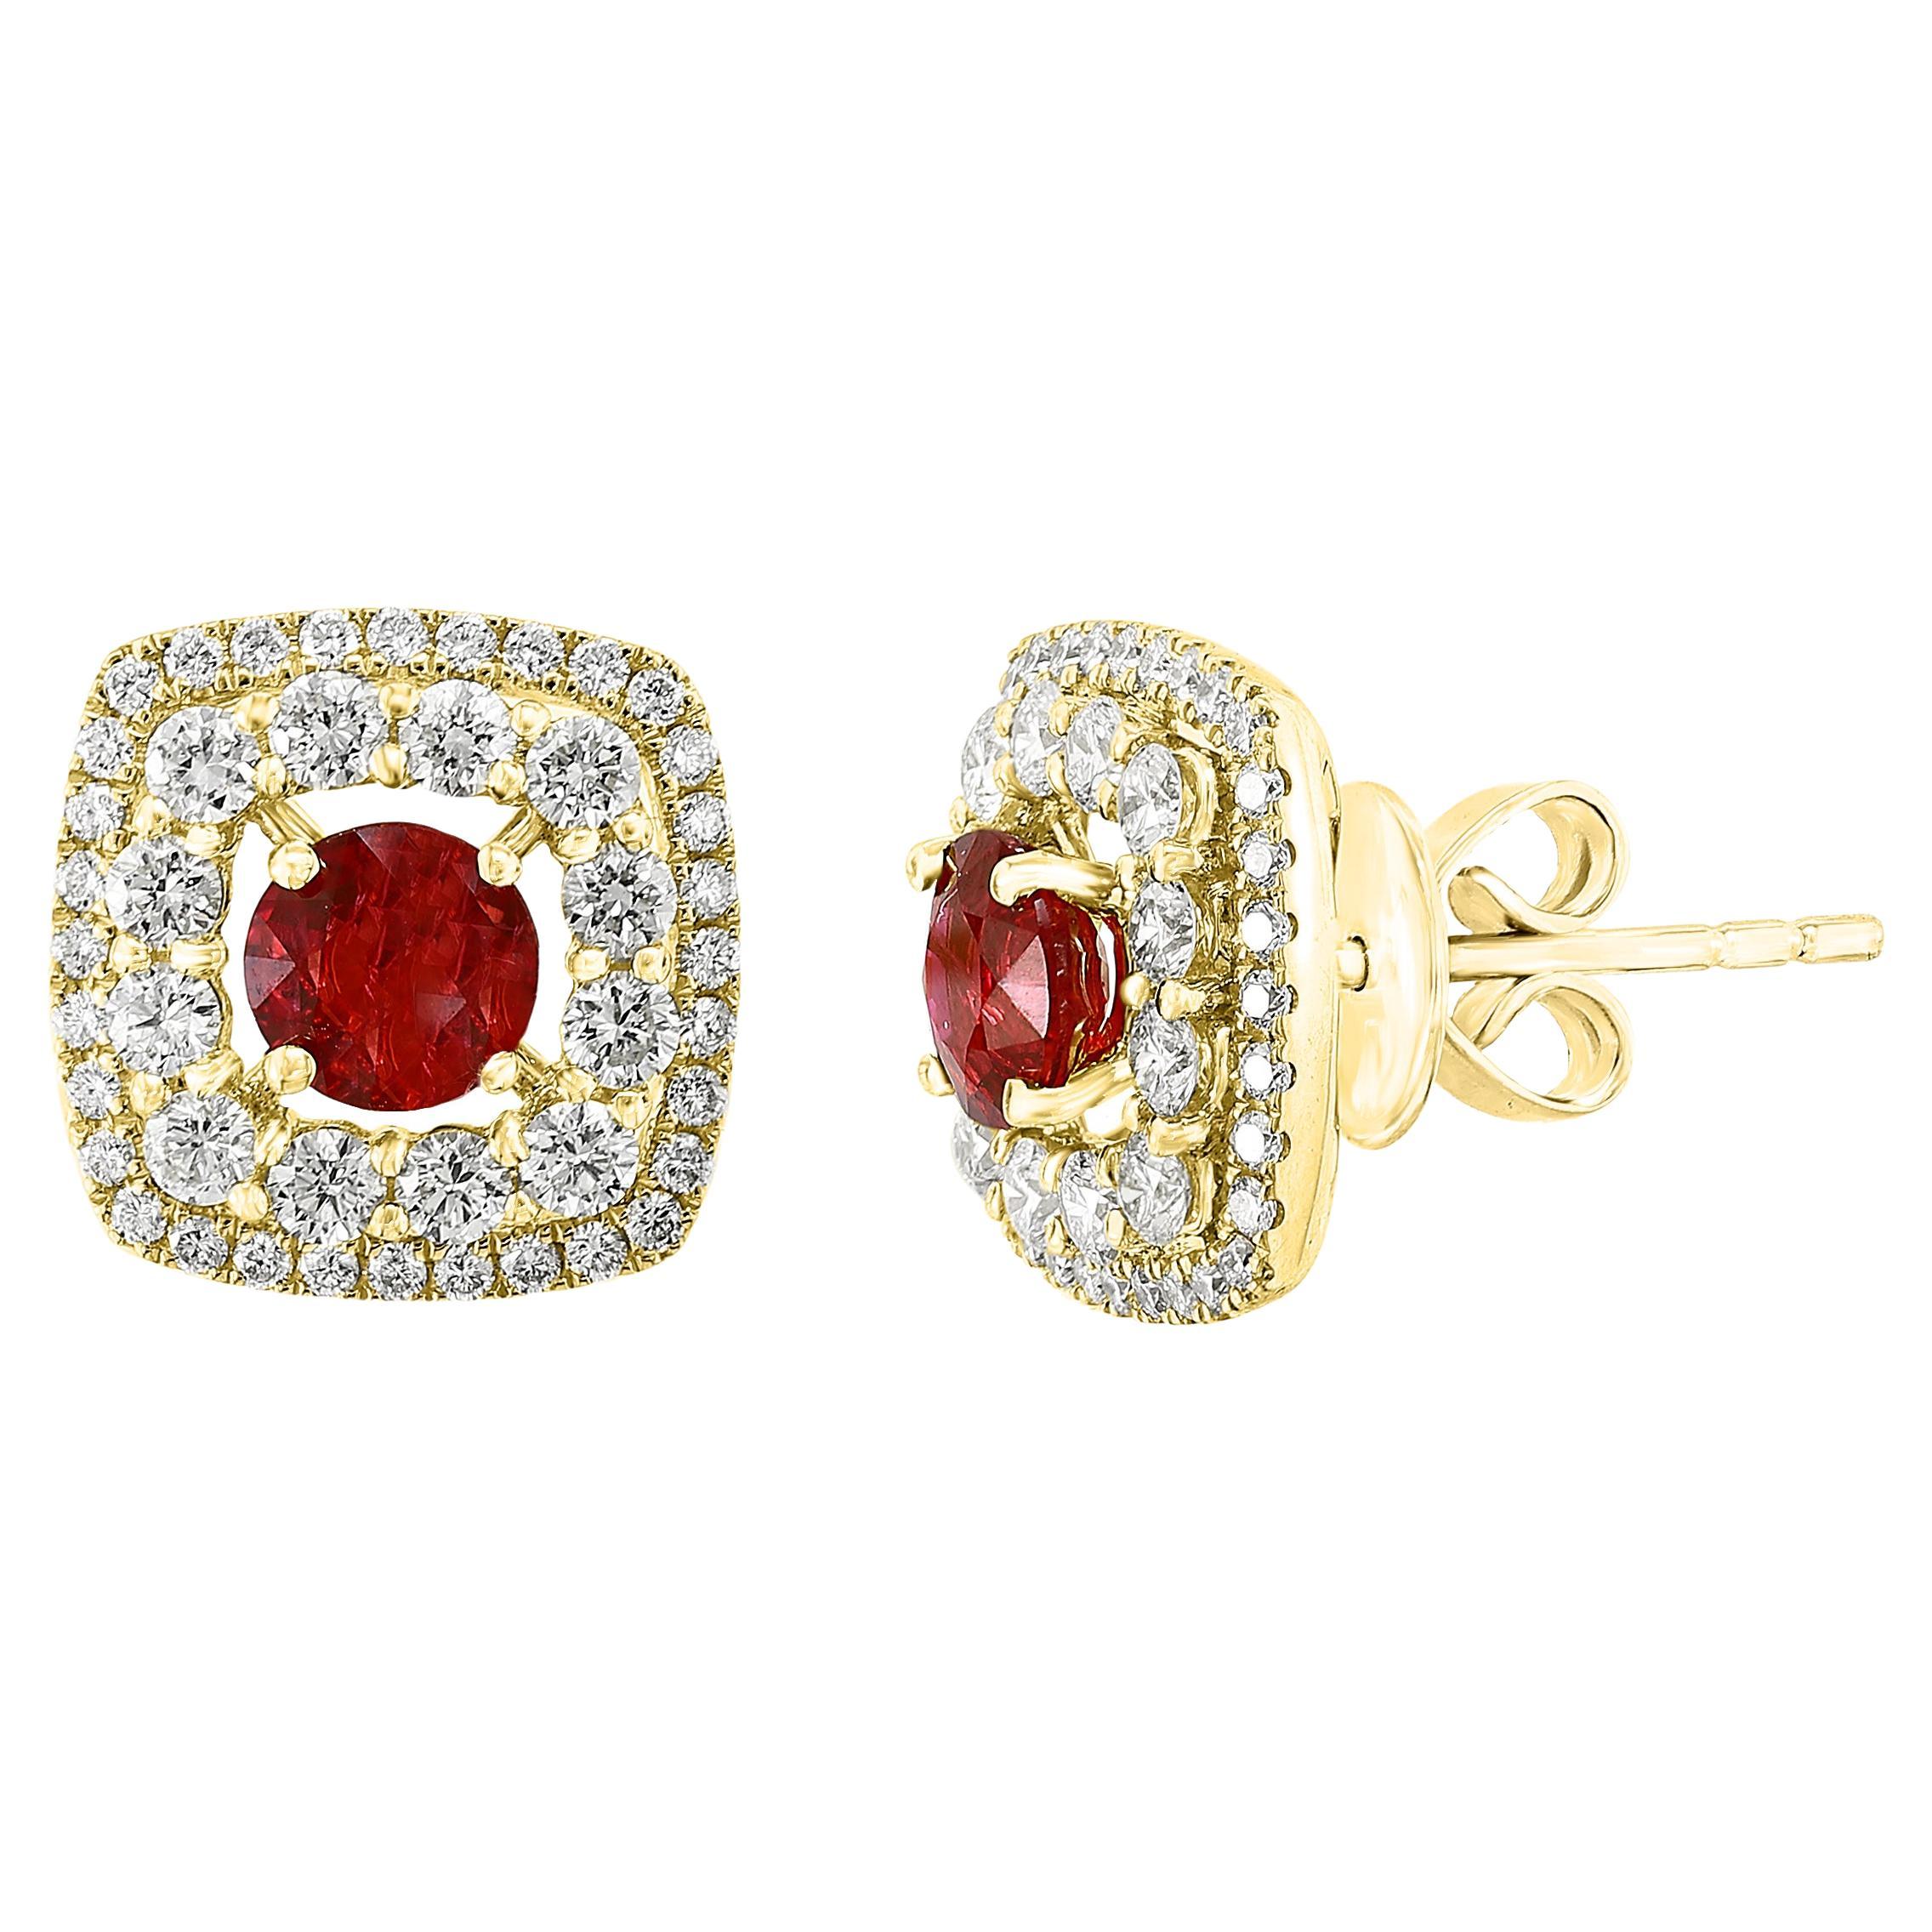 0.73 Carat Round Cut Ruby and Diamond Stud Earrings in 18K Yellow Gold For Sale